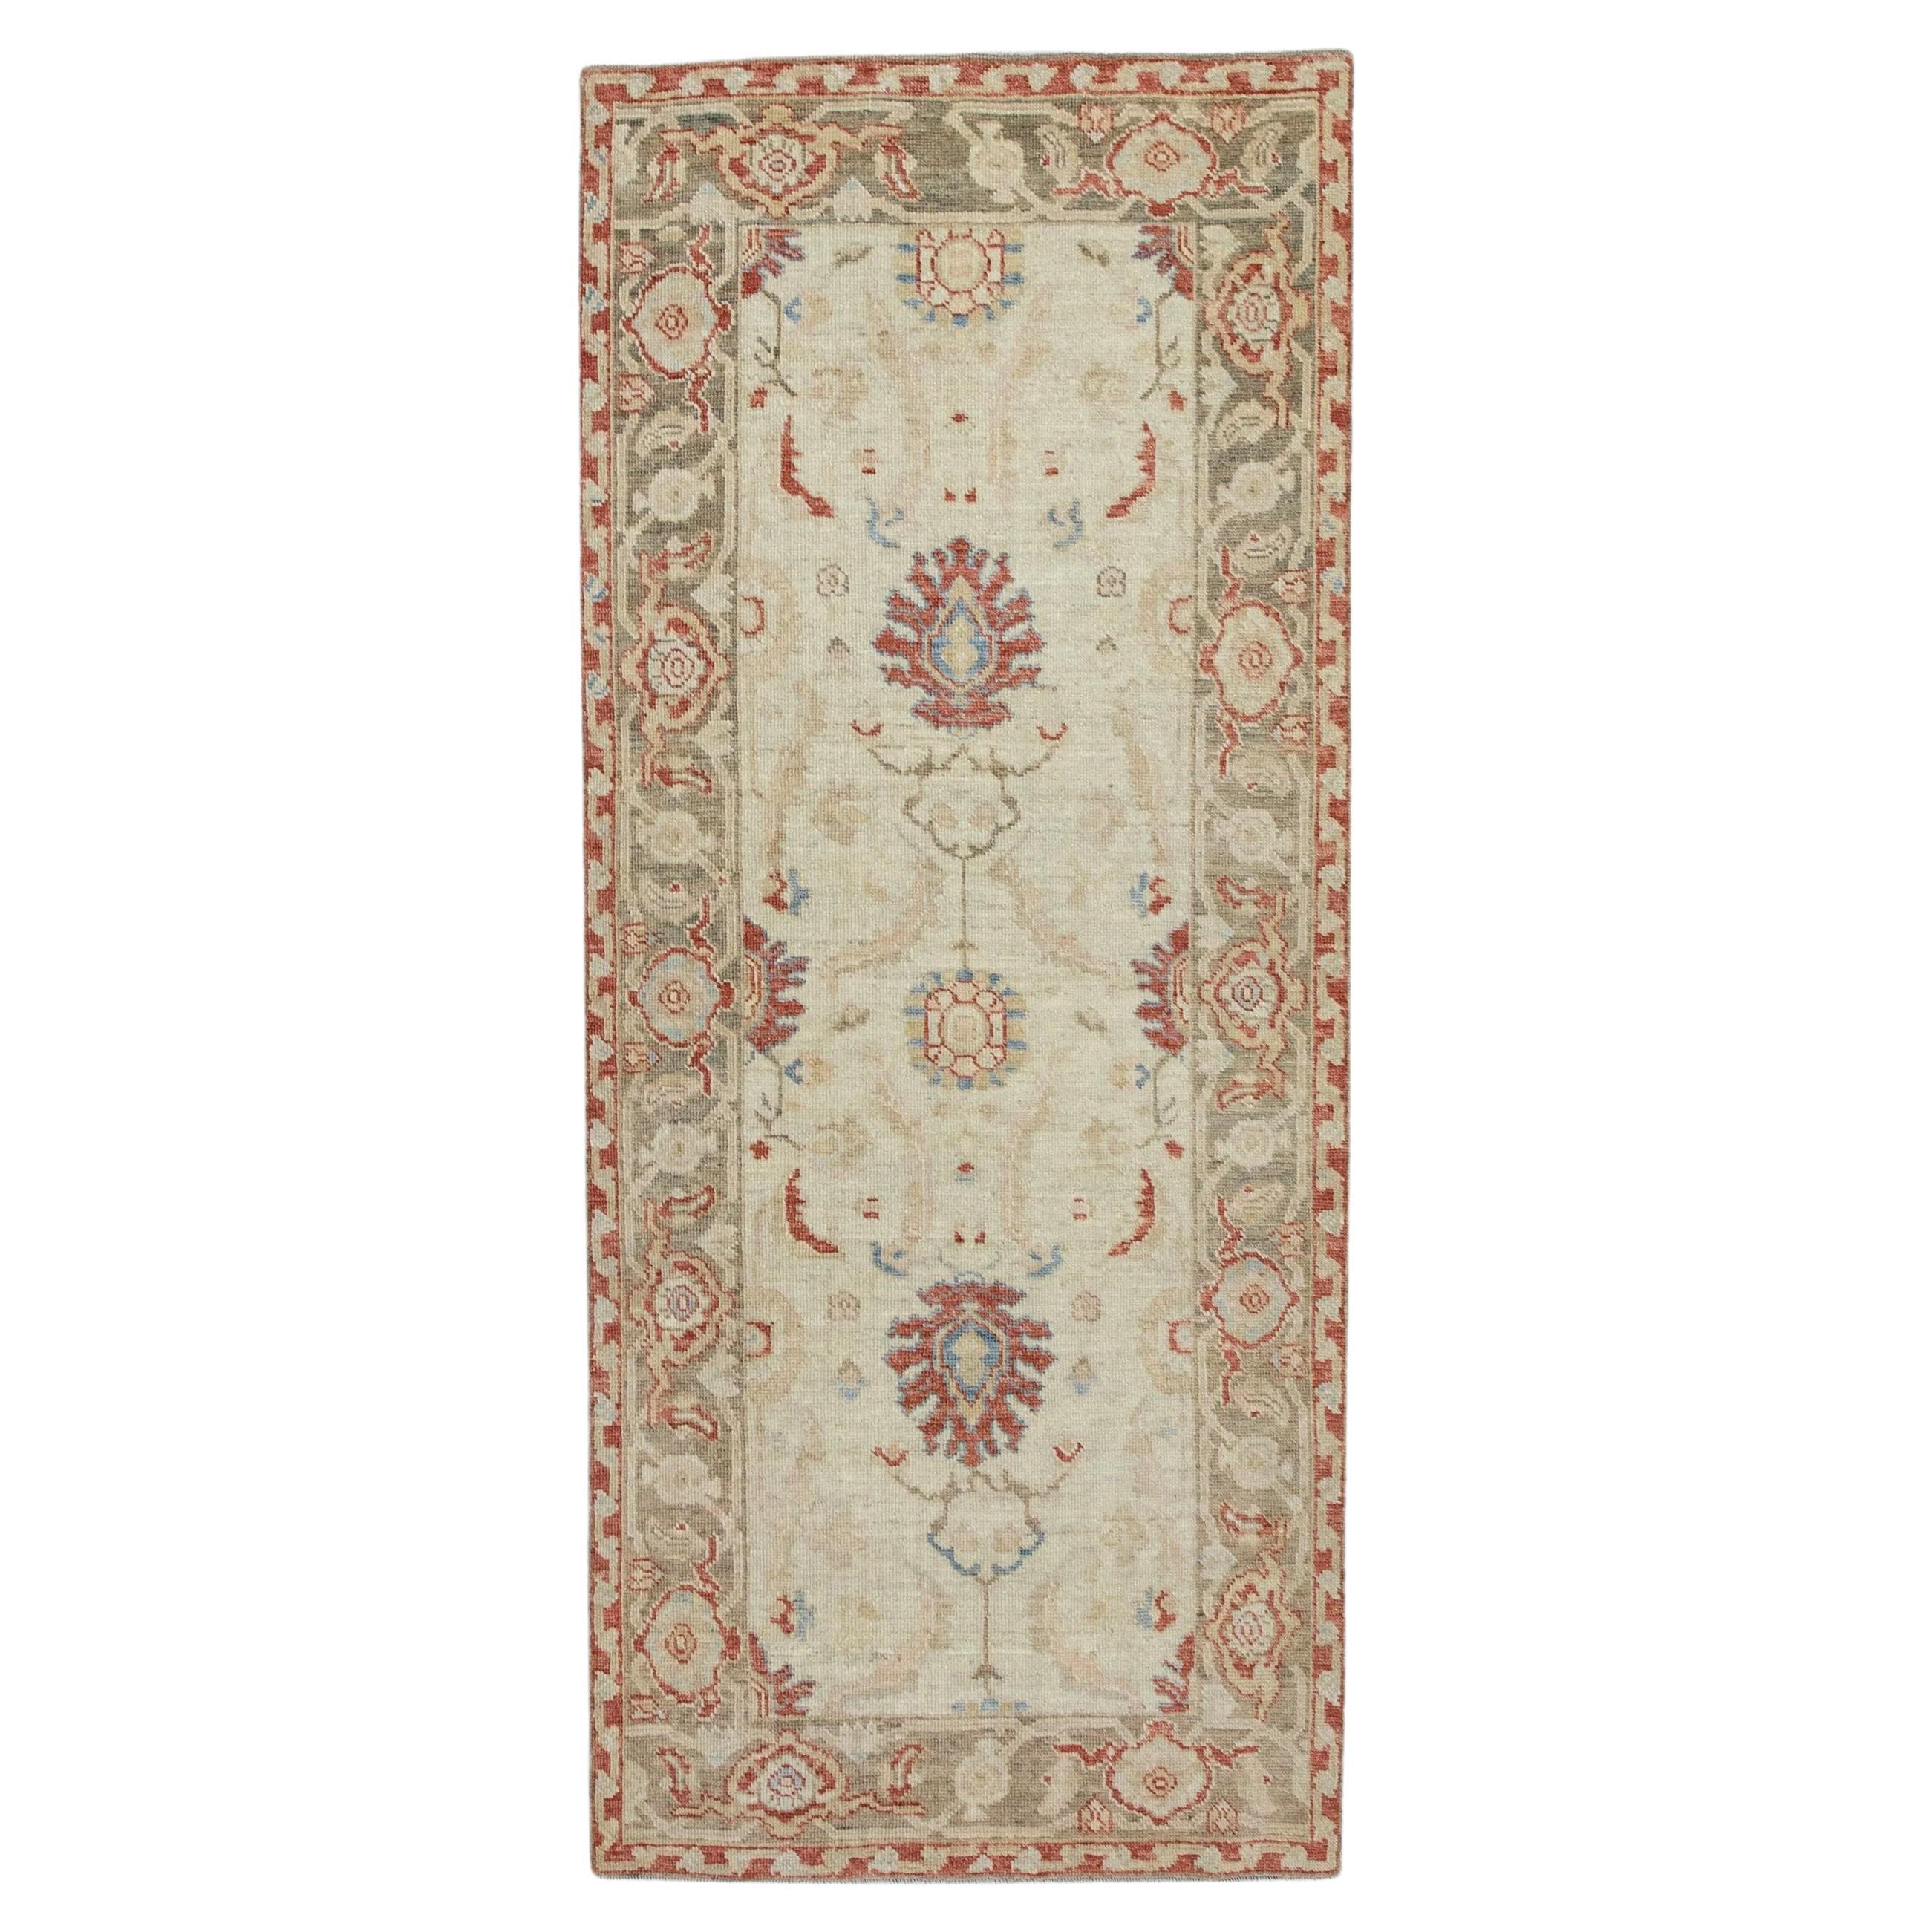 Floral Turkish Finewoven Wool Oushak Rug in Red, Cream, and Green 2'8" x 6'2"